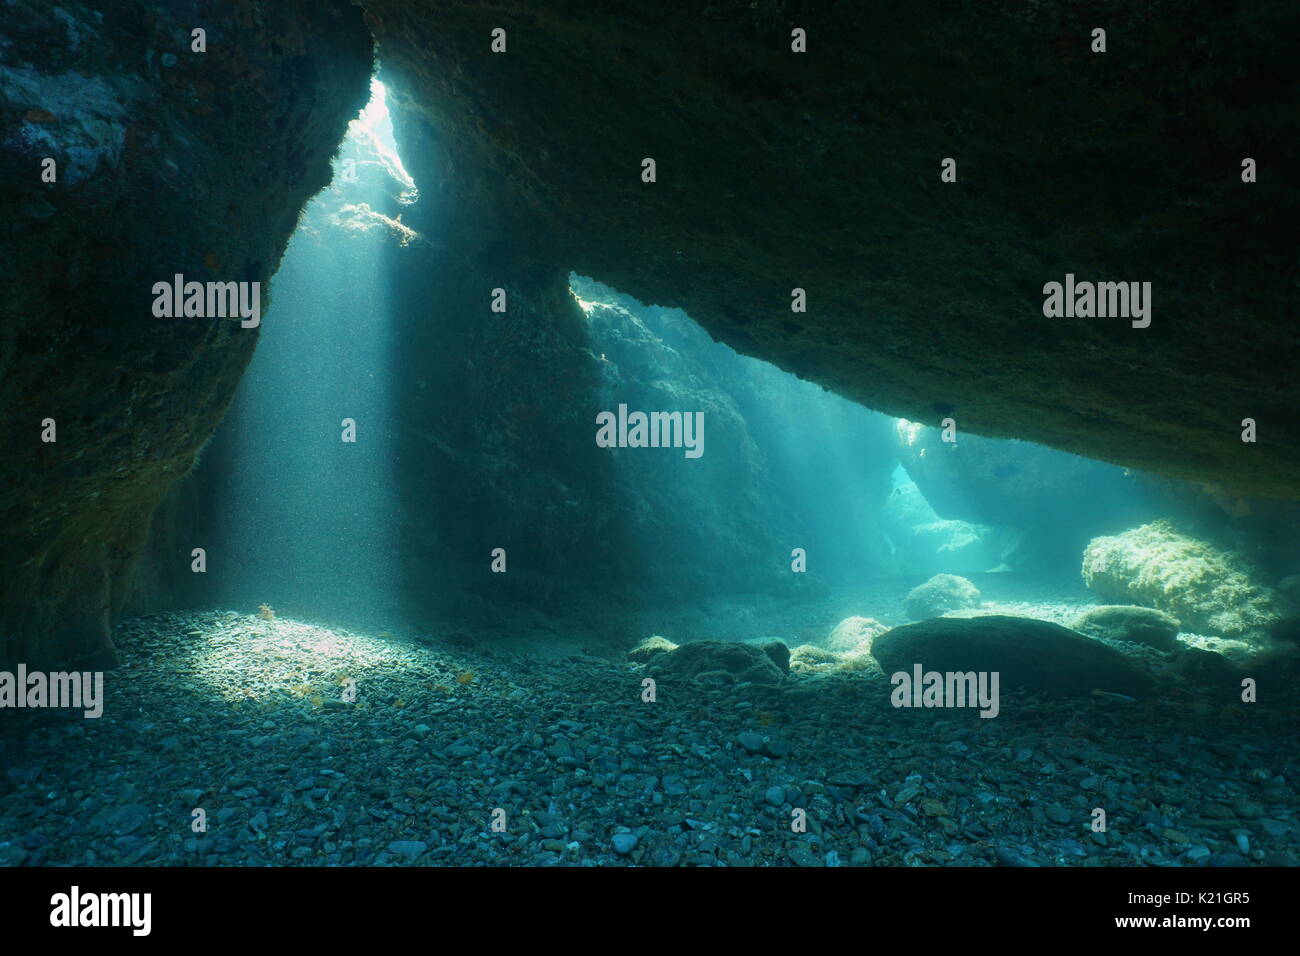 Below big rocks underwater with sunbeam from hole, Mediterranean sea, natural scene, Pyrenees Orientales, Roussillon, France Stock Photo